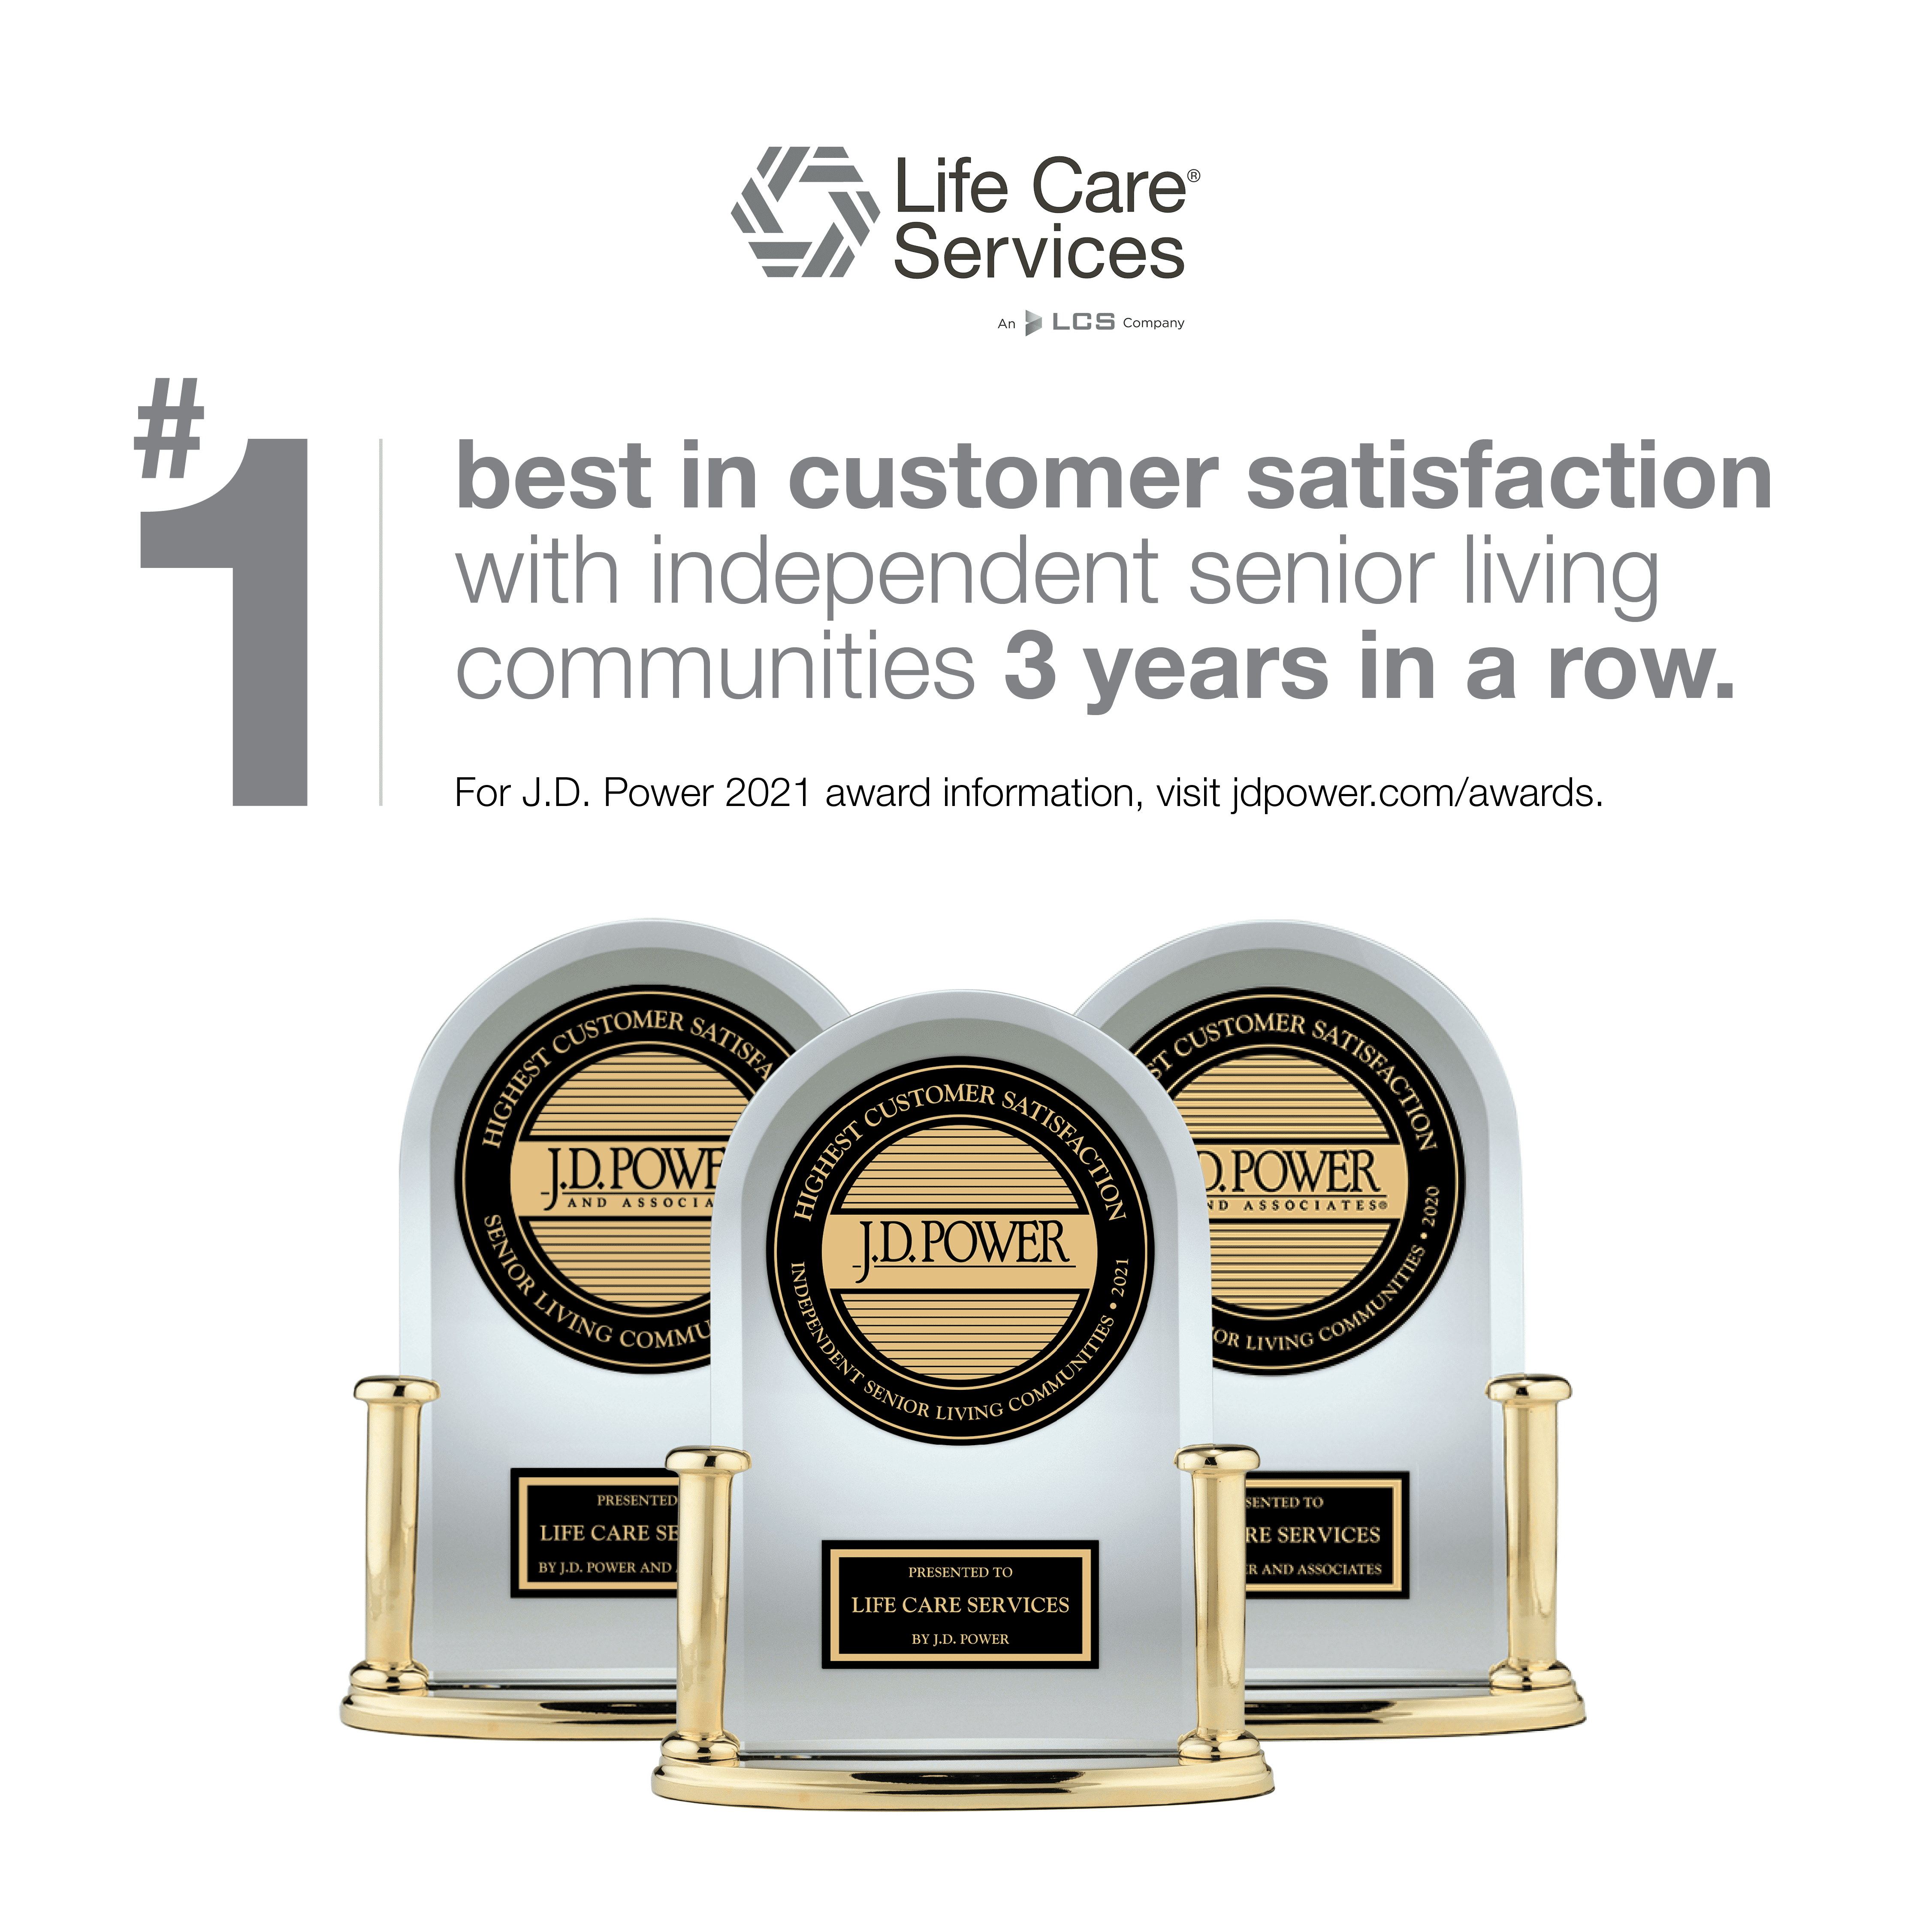 Life Care Services awarded for best customer satisfaction in senior living communities.